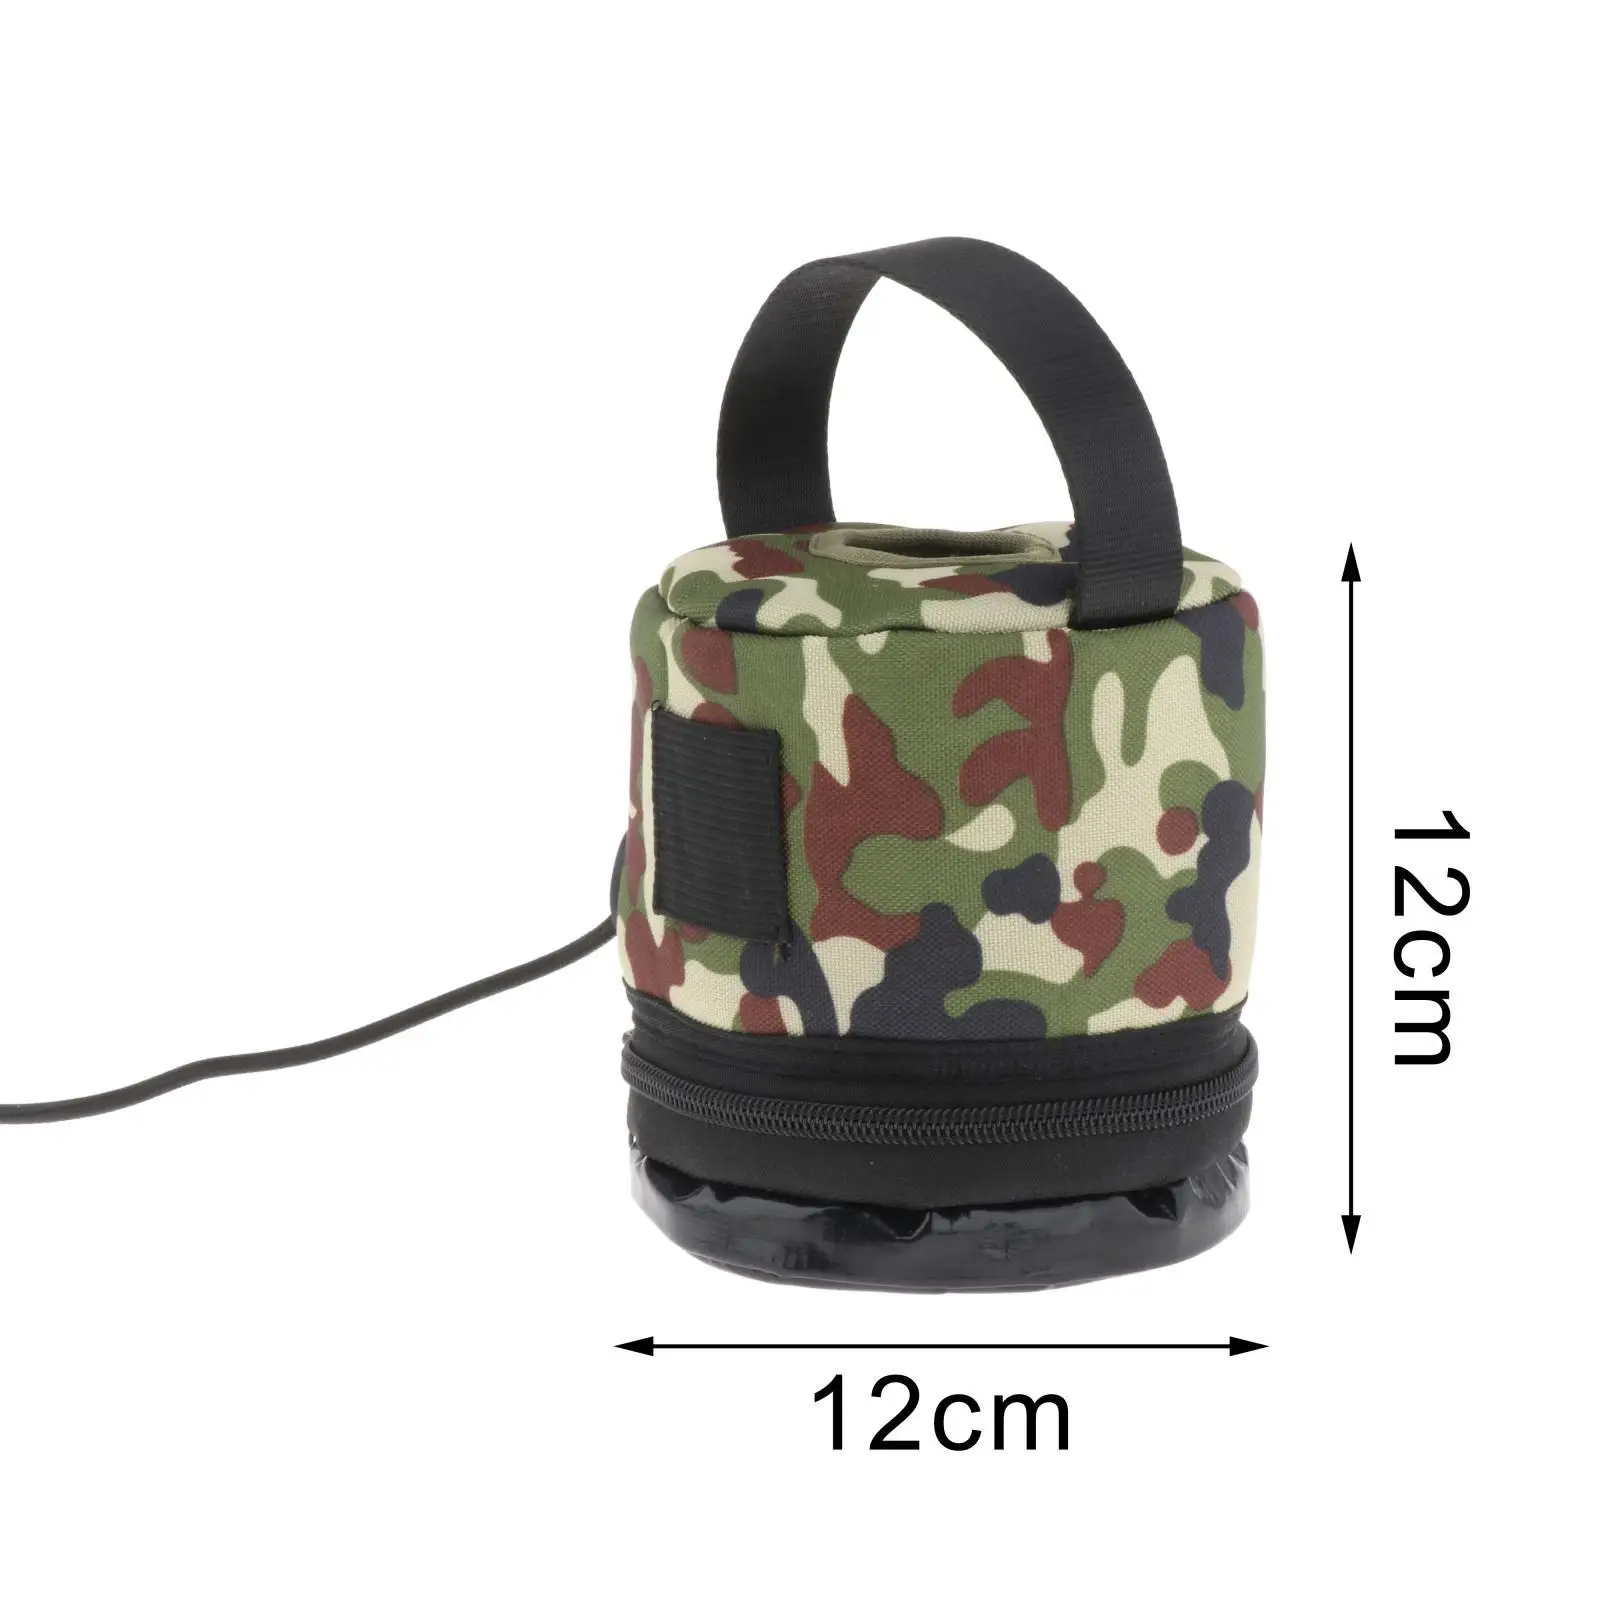 Camping Cooking Gas Tank Storage Bag Outdoor Gas Cylinder Cover Protection Fuel Cylinder Cover for Hiking Supplies BBQ Picnic